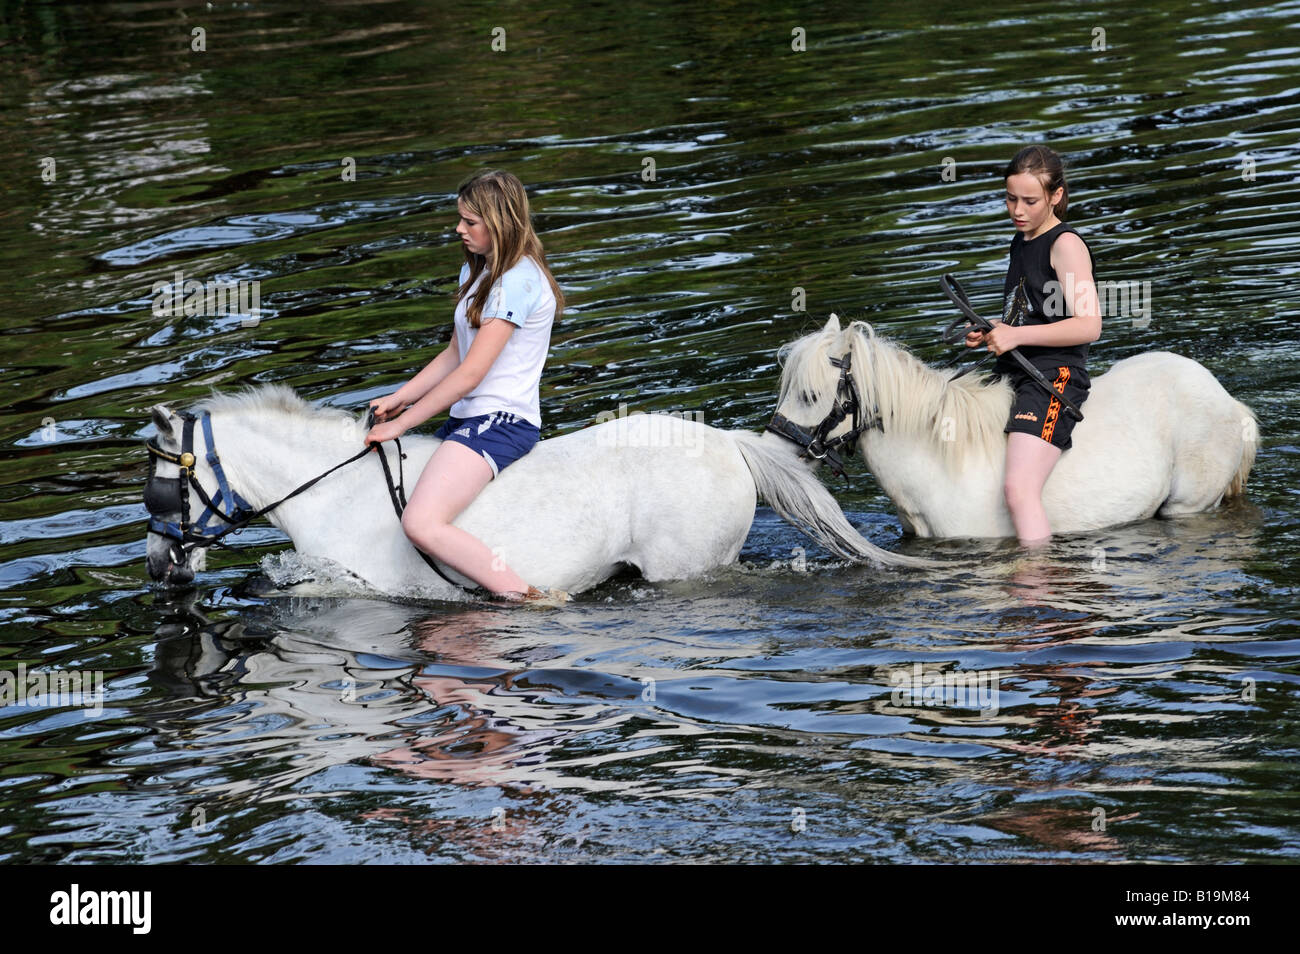 Two gypsy traveller girls riding ponies bareback in River Eden. Appleby Horse Fair. Appleby-in-Westmorland, Cumbria, England. Stock Photo